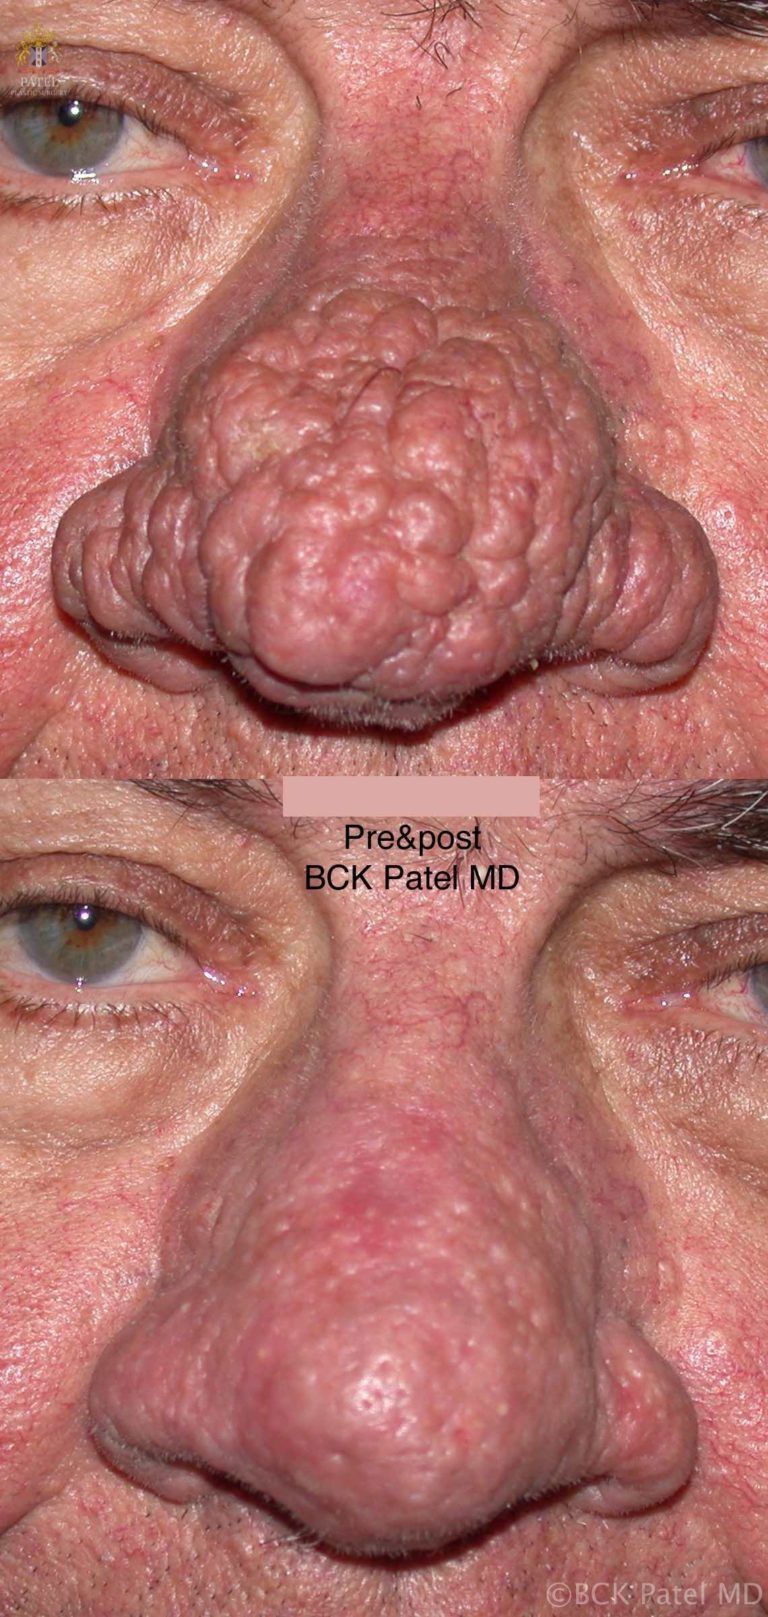 Treatment of severe rhinophyma with multiple lasers including the CO2 laser, fotofacial laser by Dr. BCK Patel of Salt Lake City